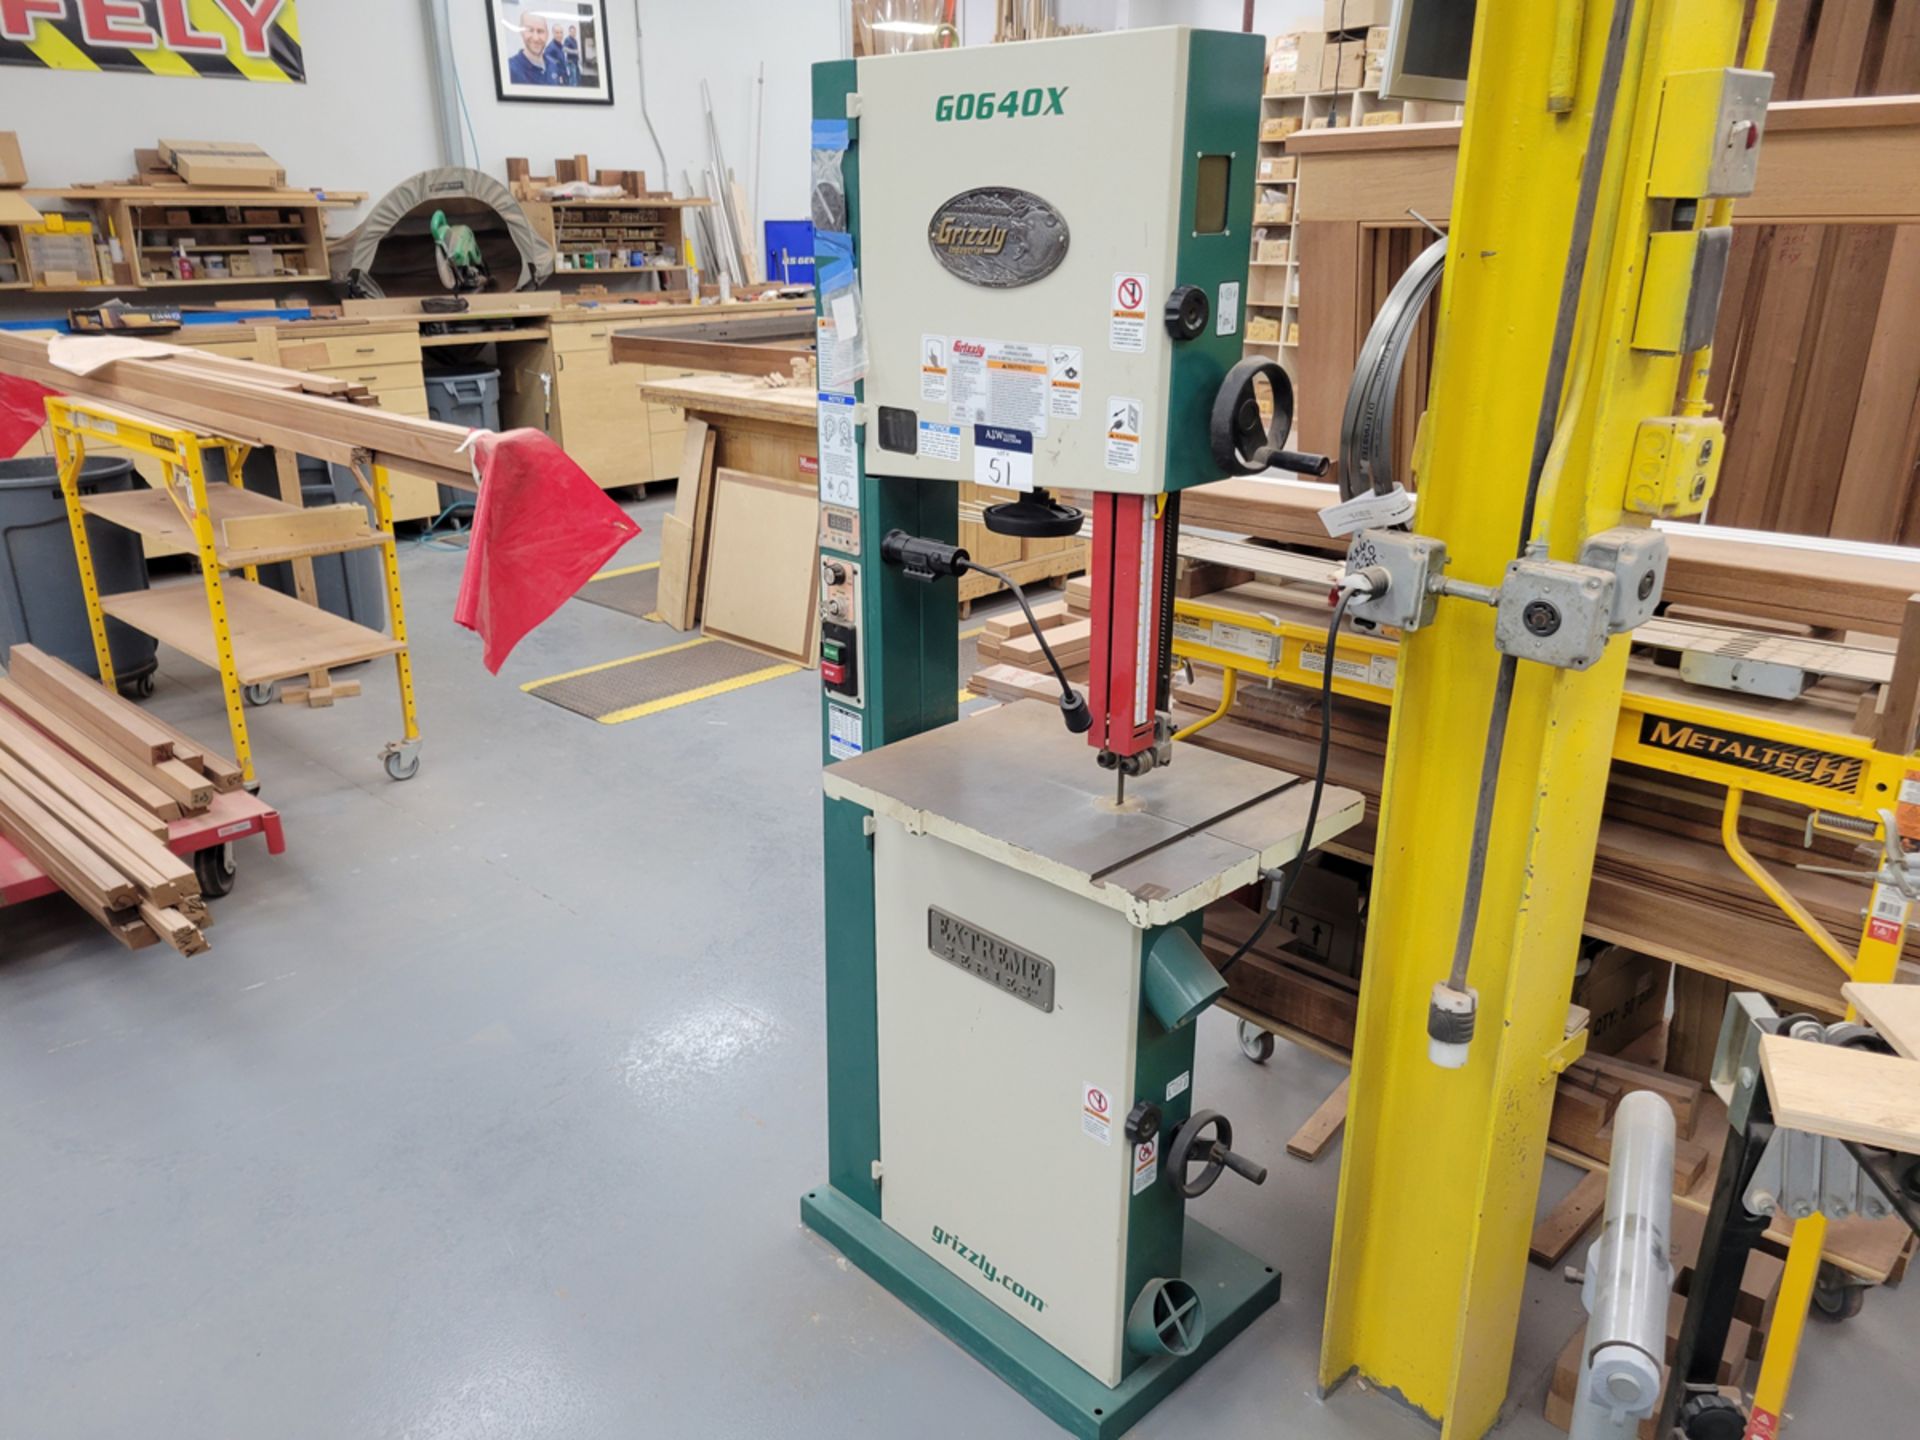 Grizzly Industrial Model: G0640X 17" Variable Speed Wood/Metal Cutting Bandsaw